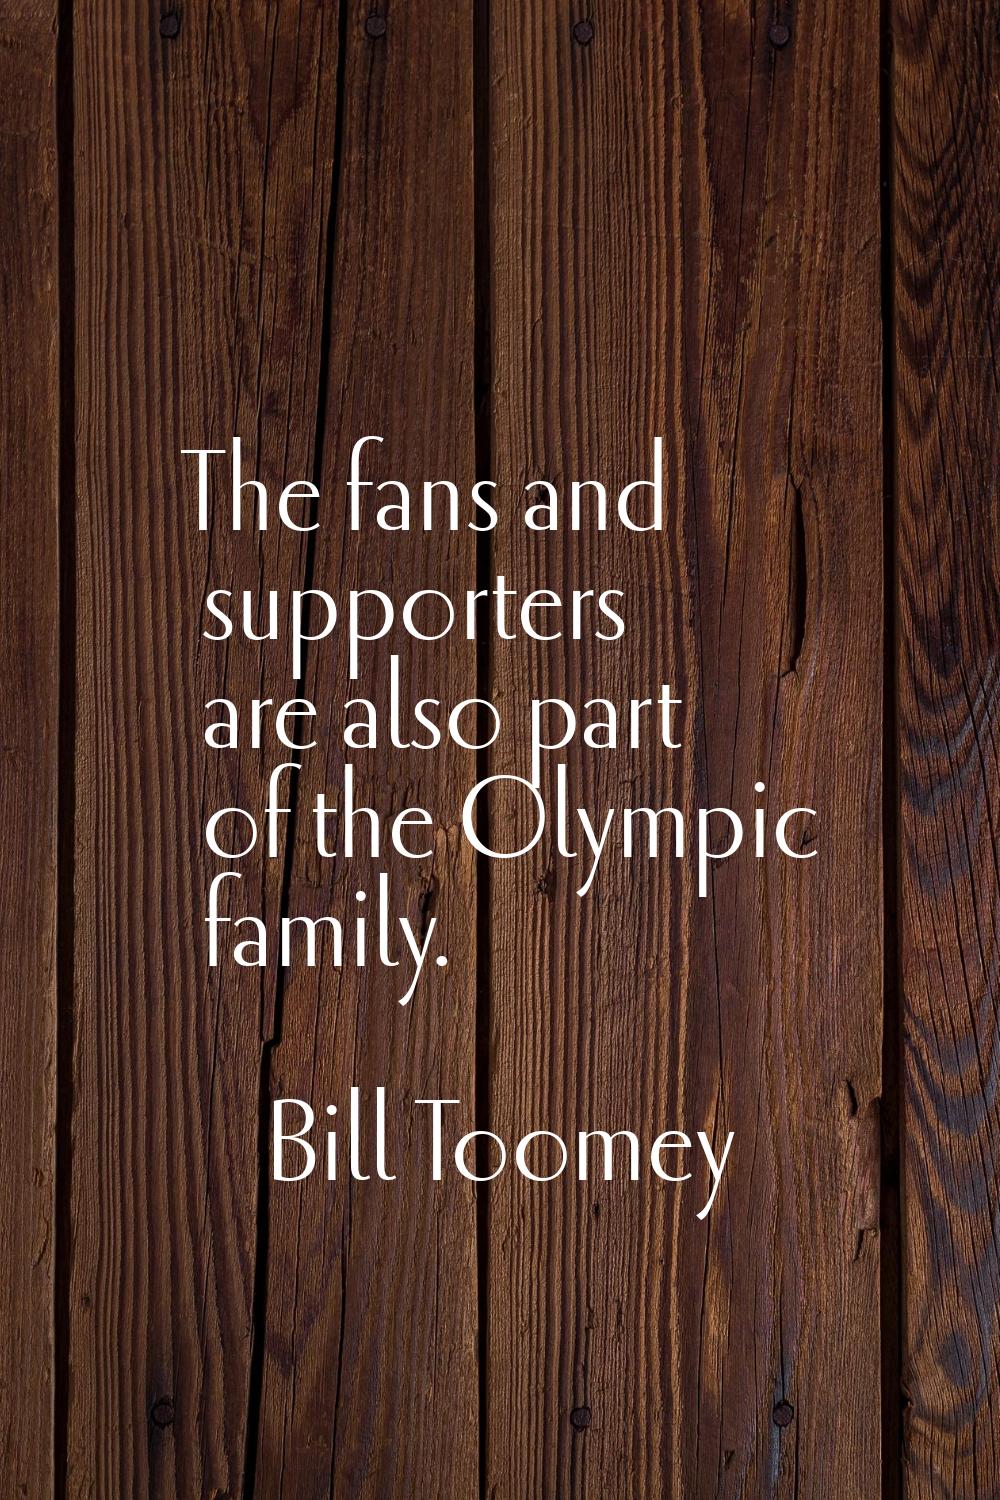 The fans and supporters are also part of the Olympic family.